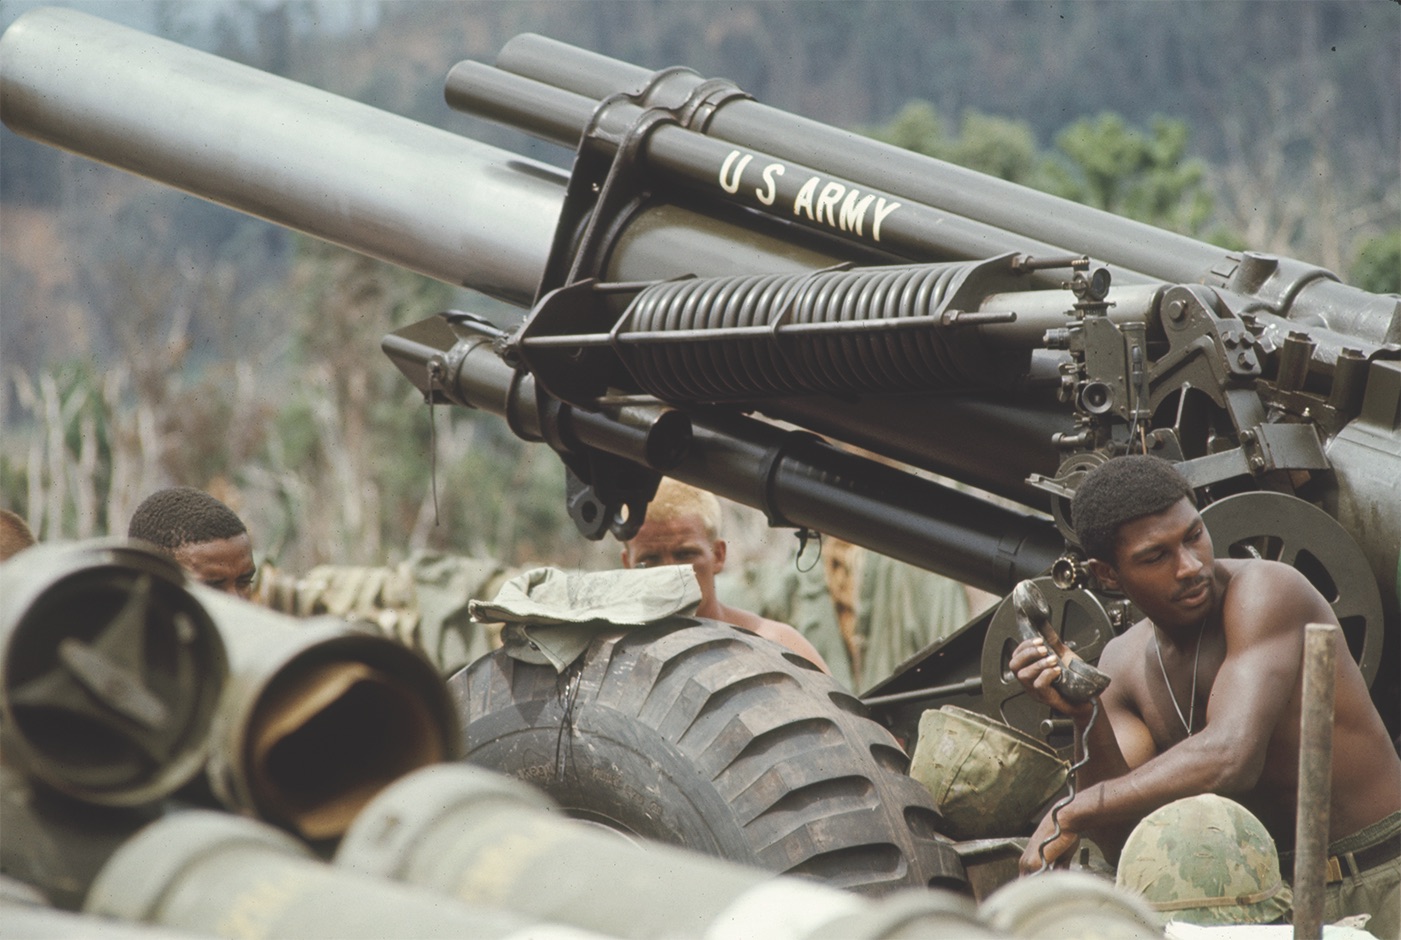 Powerful weapons in the U.S. fire support arsenal included artillery like the Army M114 155 mm howitzer shown in northern South Vietnam in 1968. (Corent Meester/The Life Picture Collection via Getty Images_